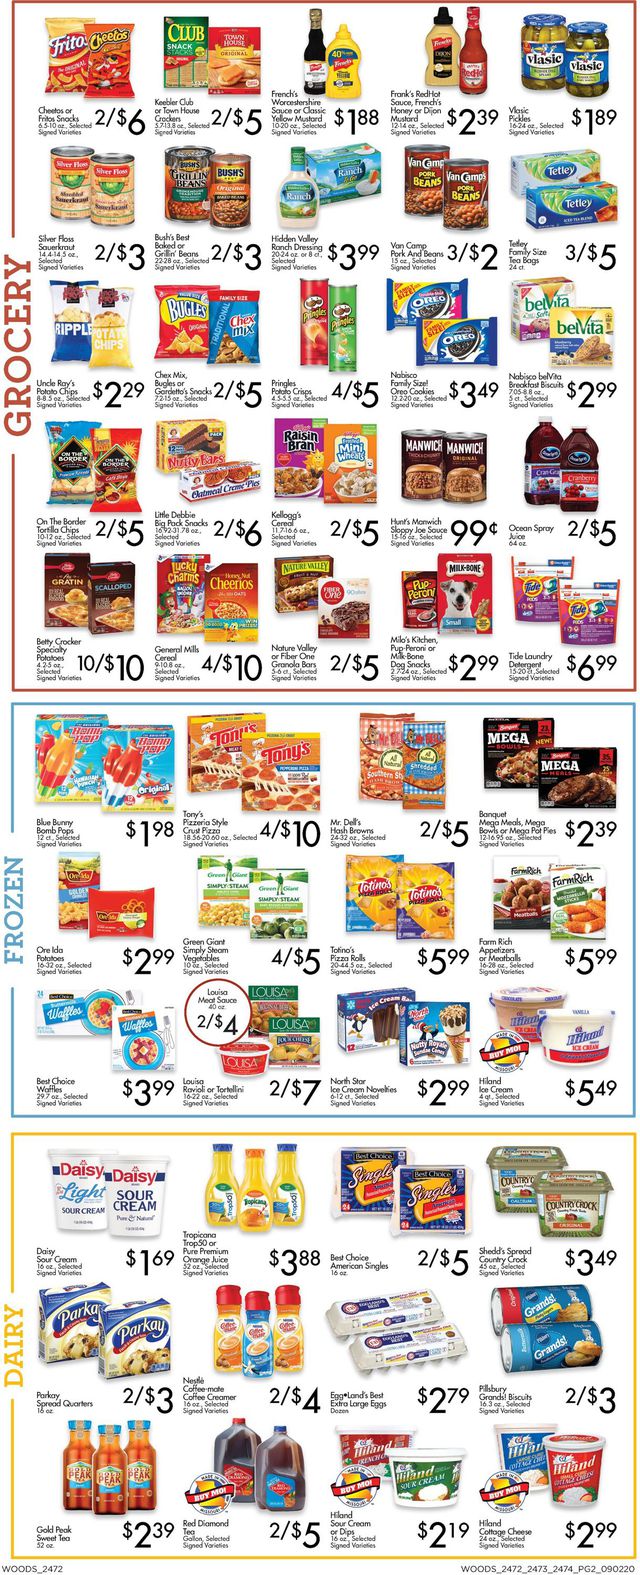 Woods Supermarket Ad from 09/02/2020